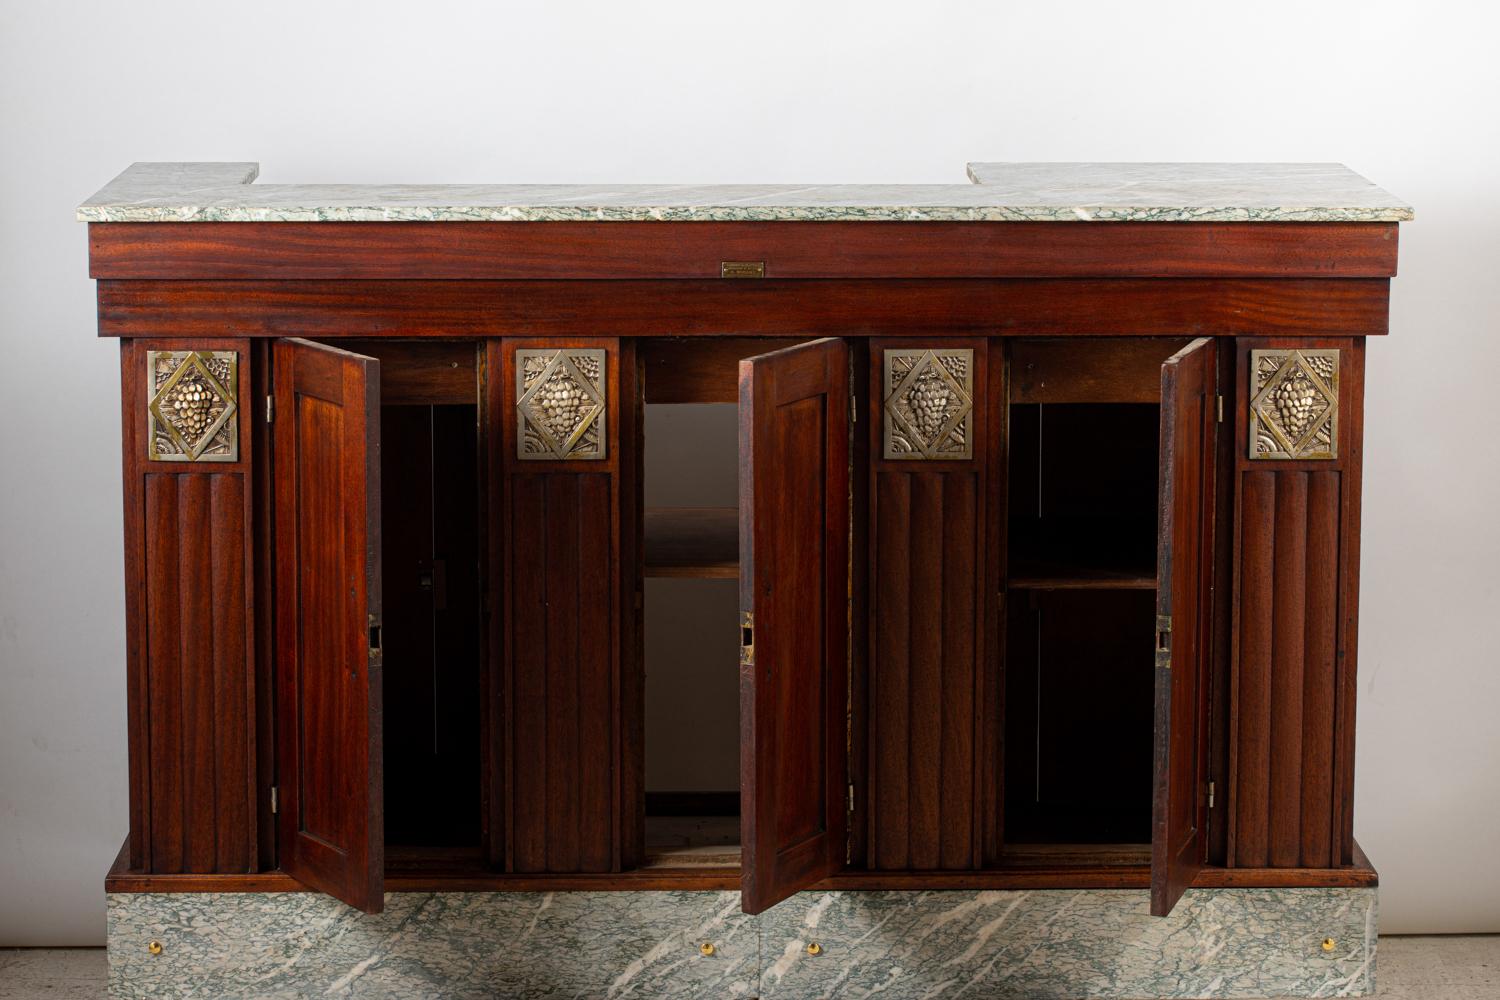 Nice bar from the Art Deco period of small size, opening with drawers and doors on both sides.
It's in sipo with ornaments with a bunch of grapes in silvered bronze.
The top and plinths are lined with Vert d'Estours marble.
The interior is lined